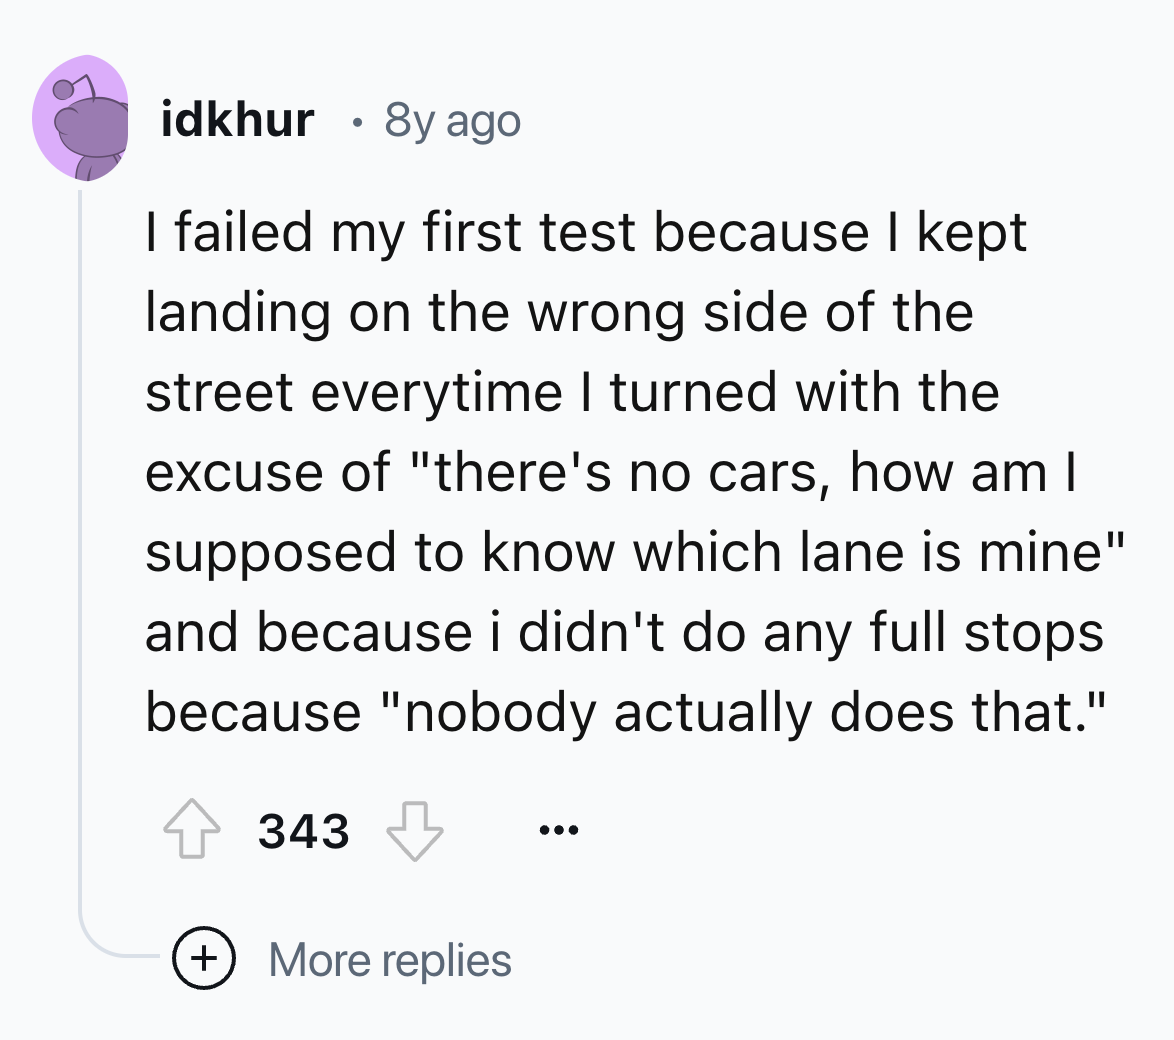 circle - idkhur . 8y ago I failed my first test because I kept landing on the wrong side of the street everytime I turned with the excuse of "there's no cars, how am I supposed to know which lane is mine" and because i didn't do any full stops because "no